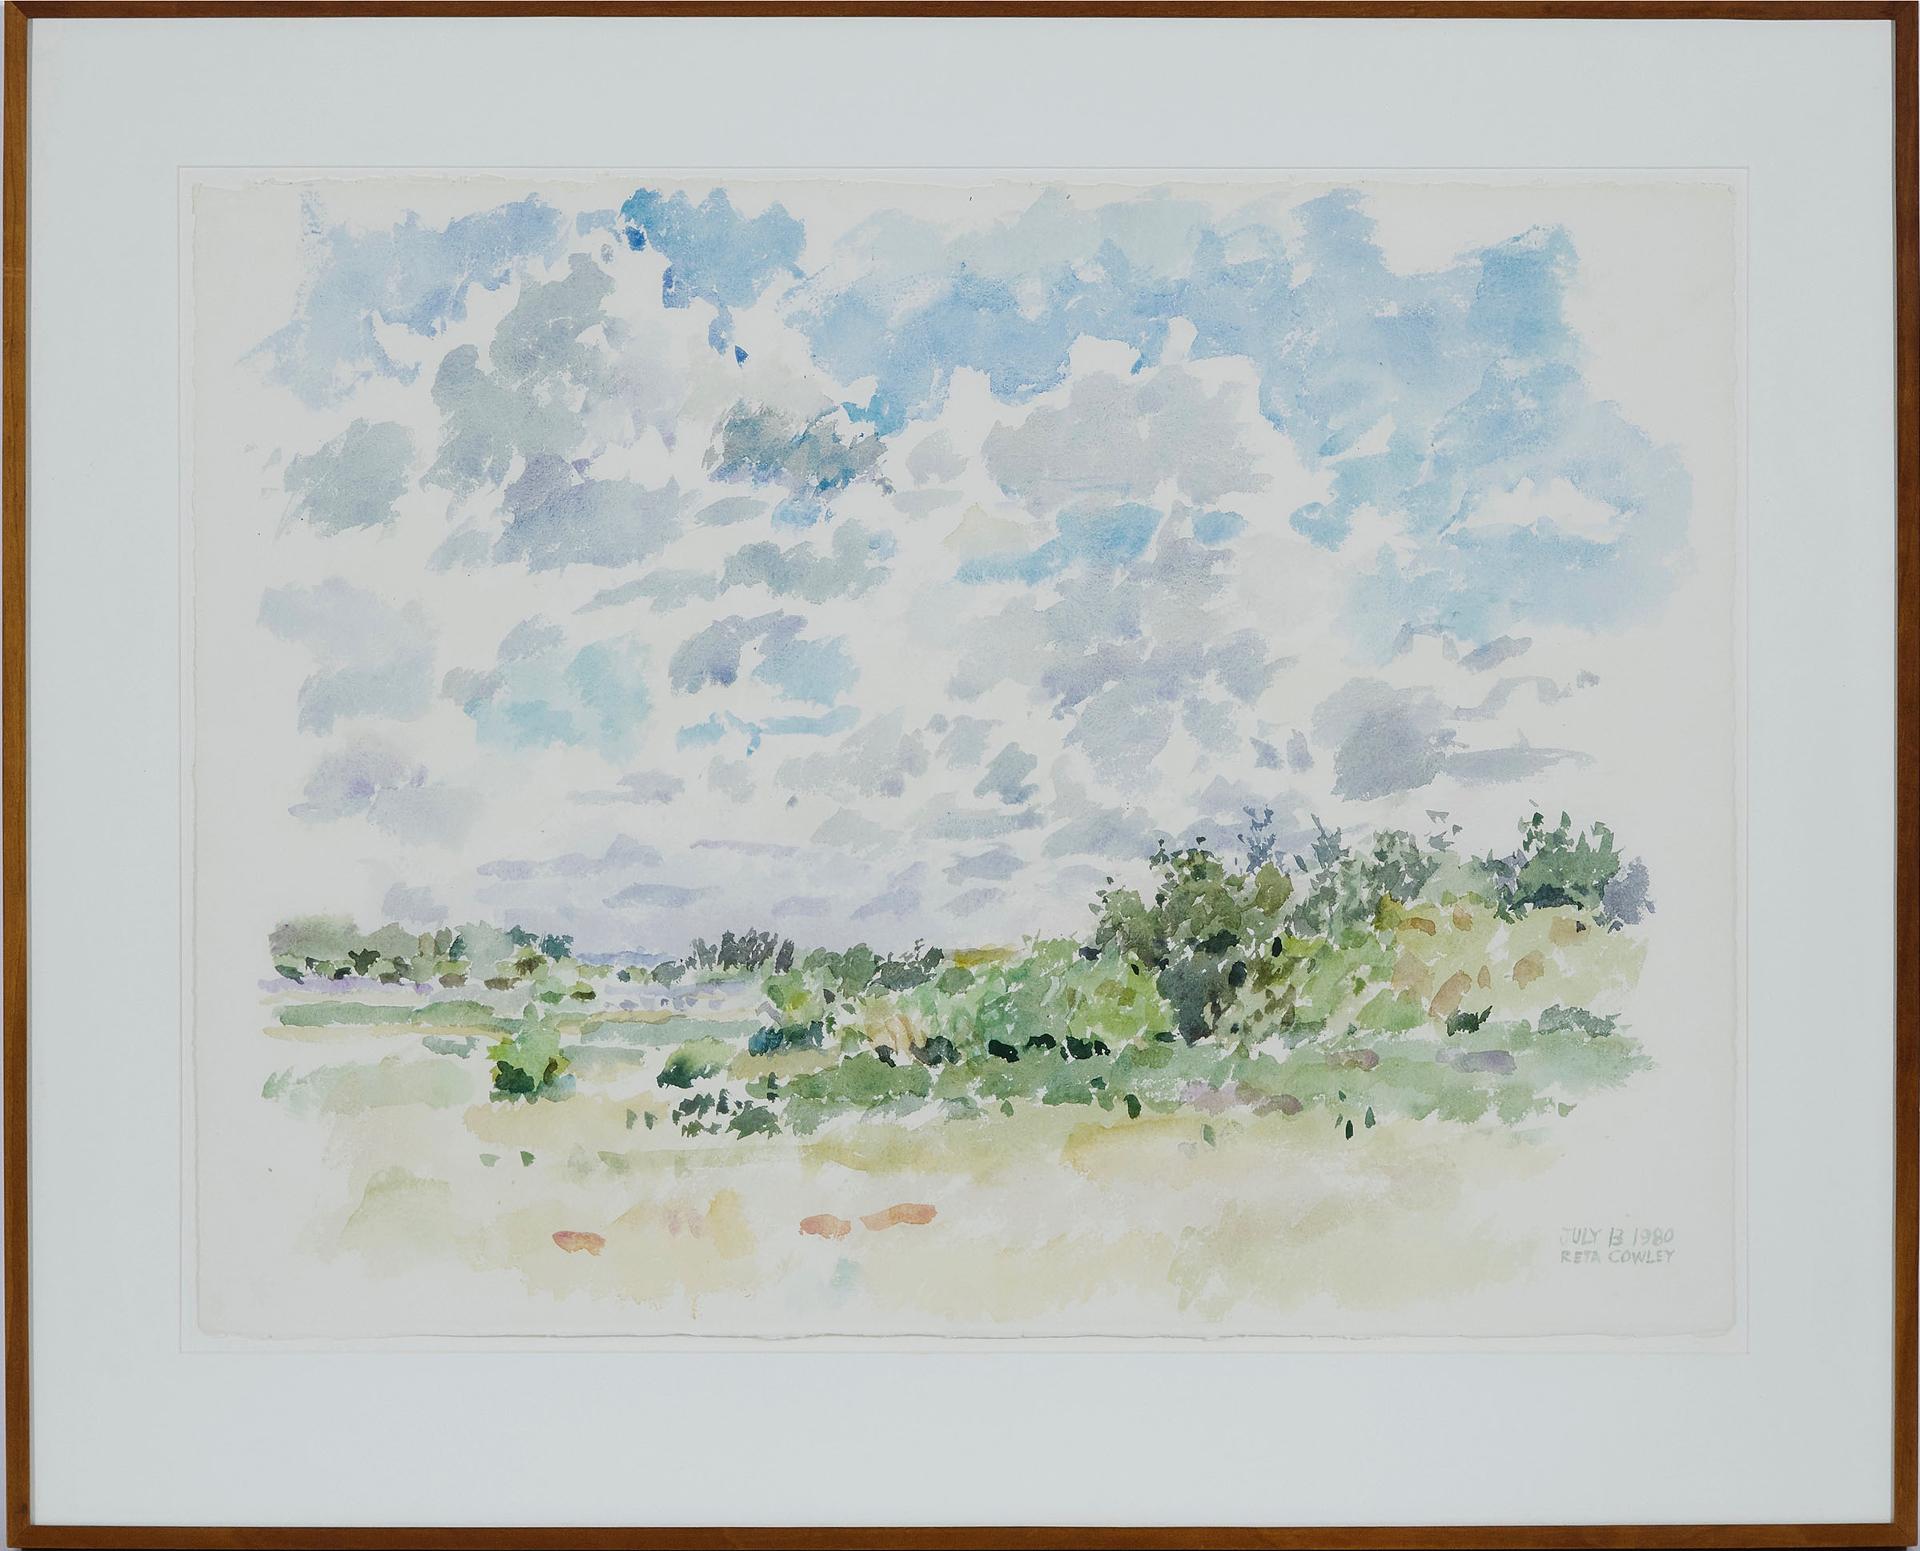 Reta Madeline Cowley (1910-2004) - Untitled (Cloudy Day)